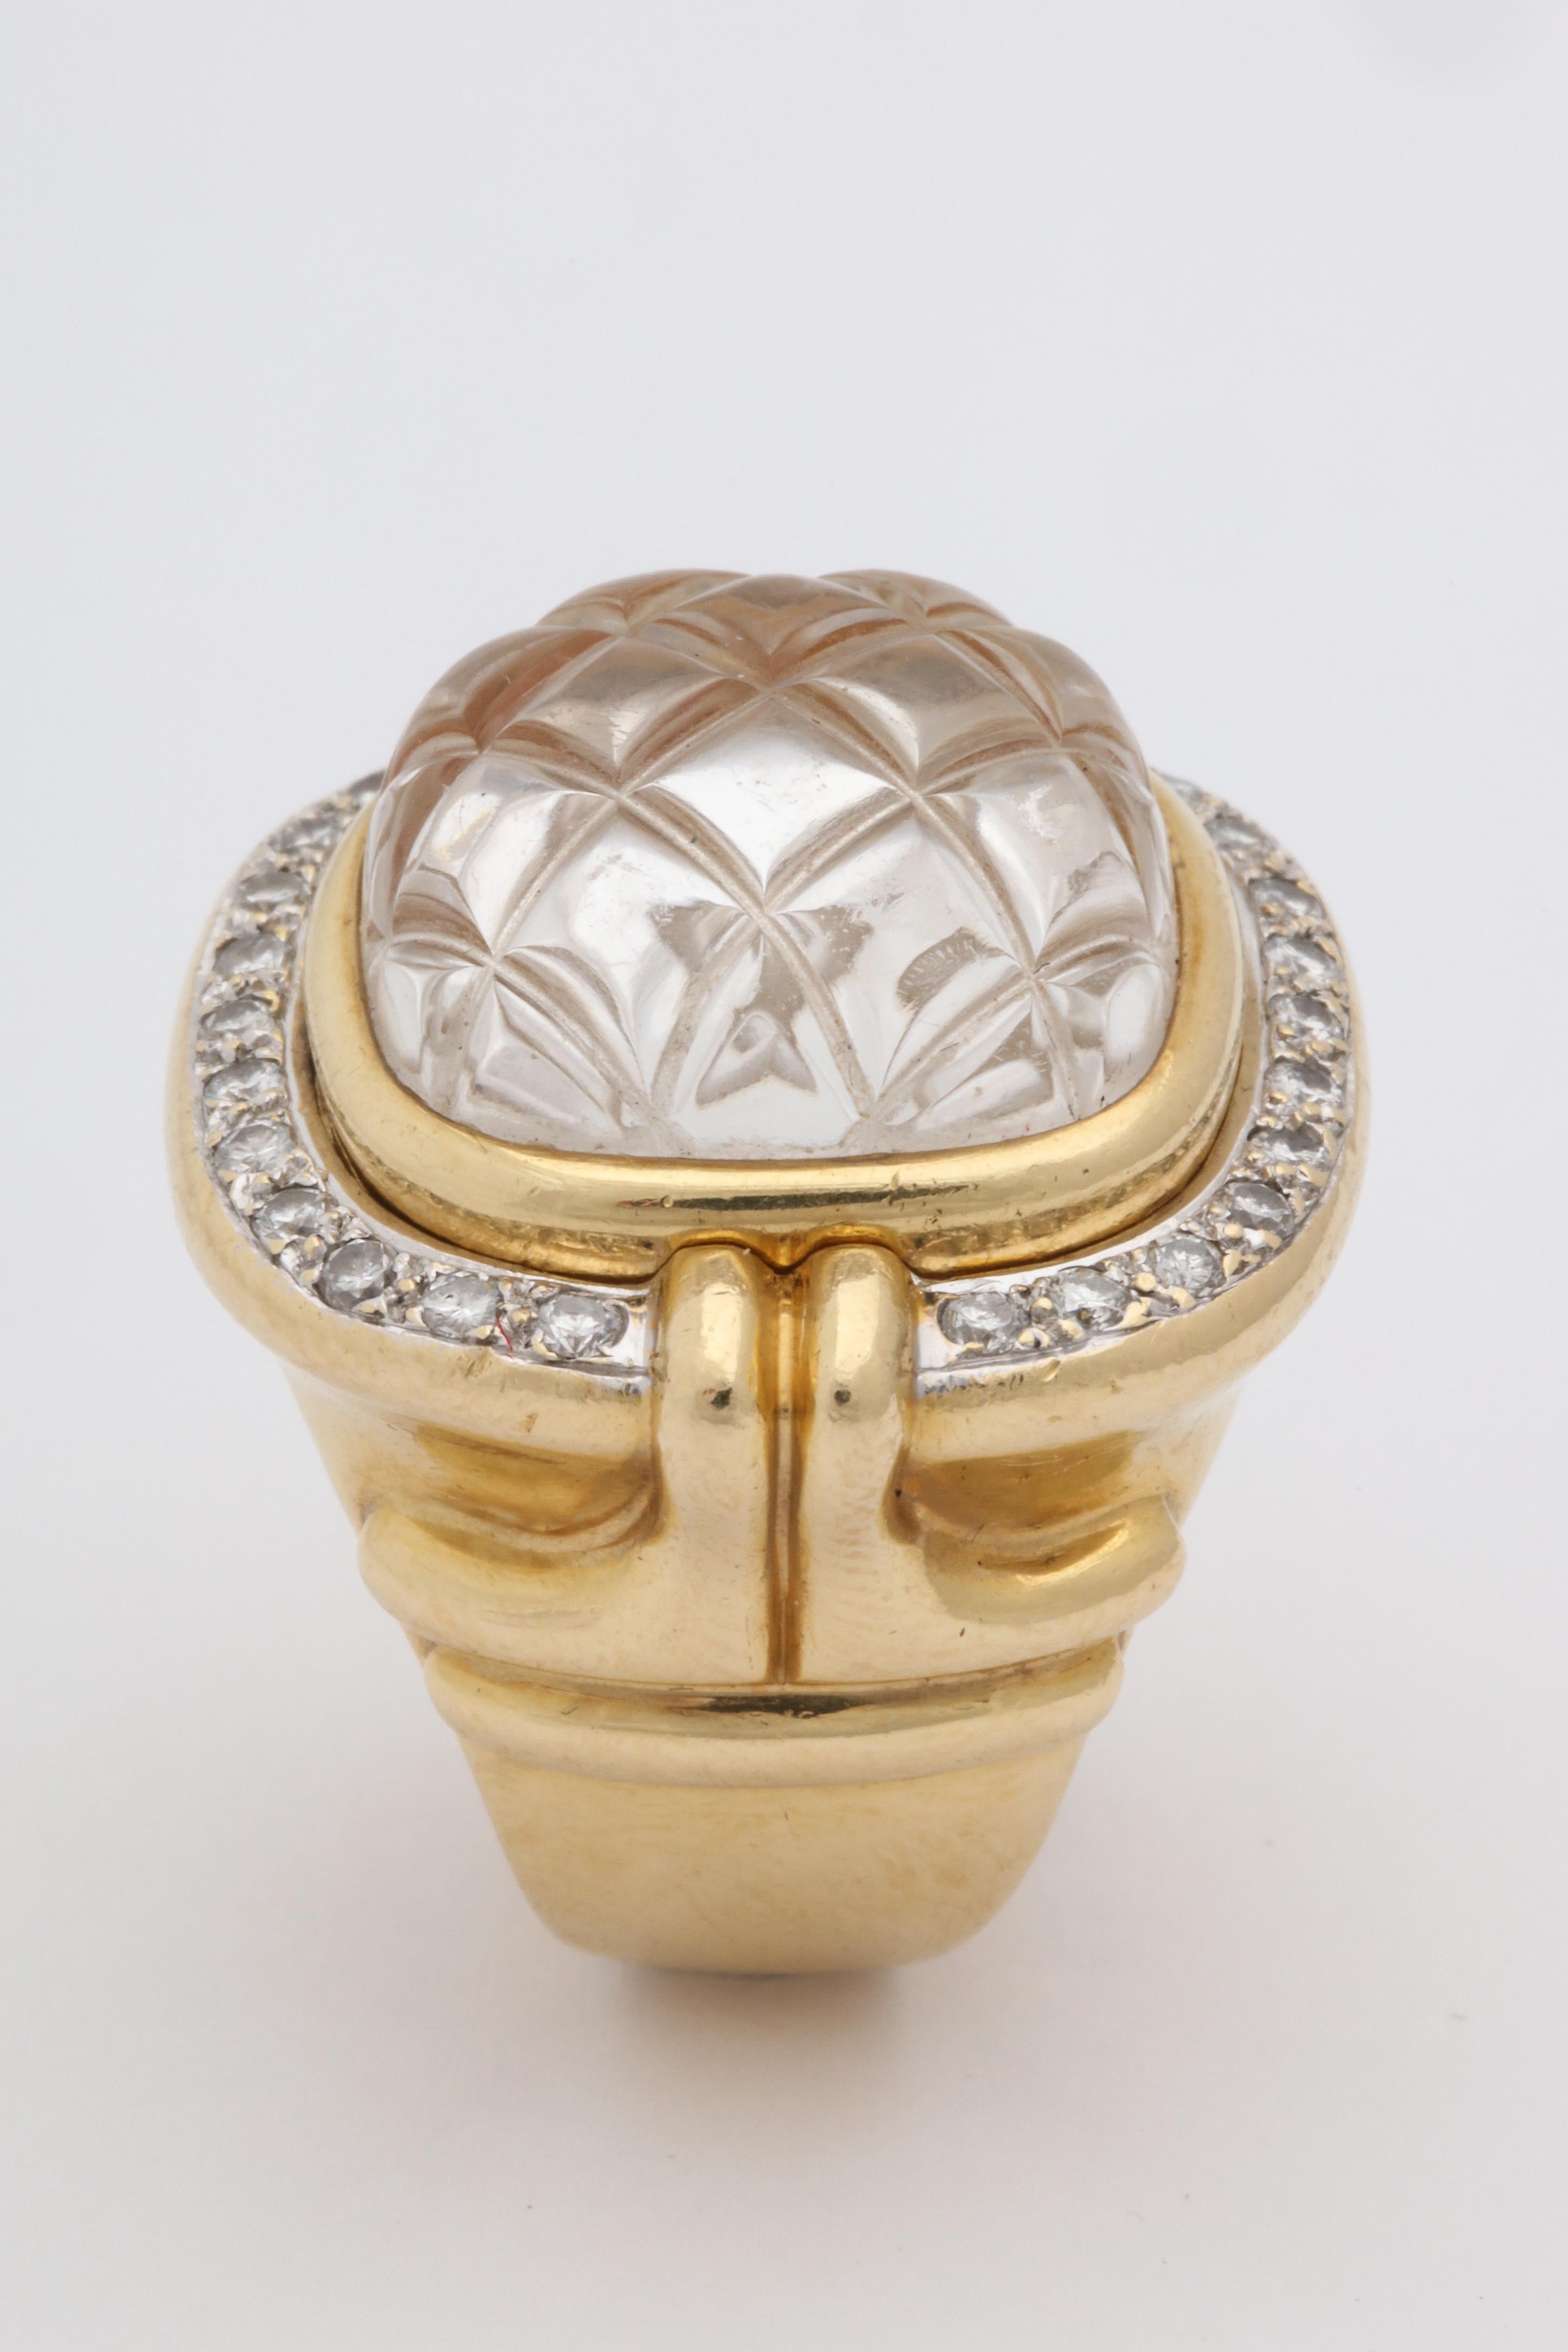 1980 Heavy Quilted Rock Crystal with Diamonds Fantasy Large Gold Cocktail Ring Damen